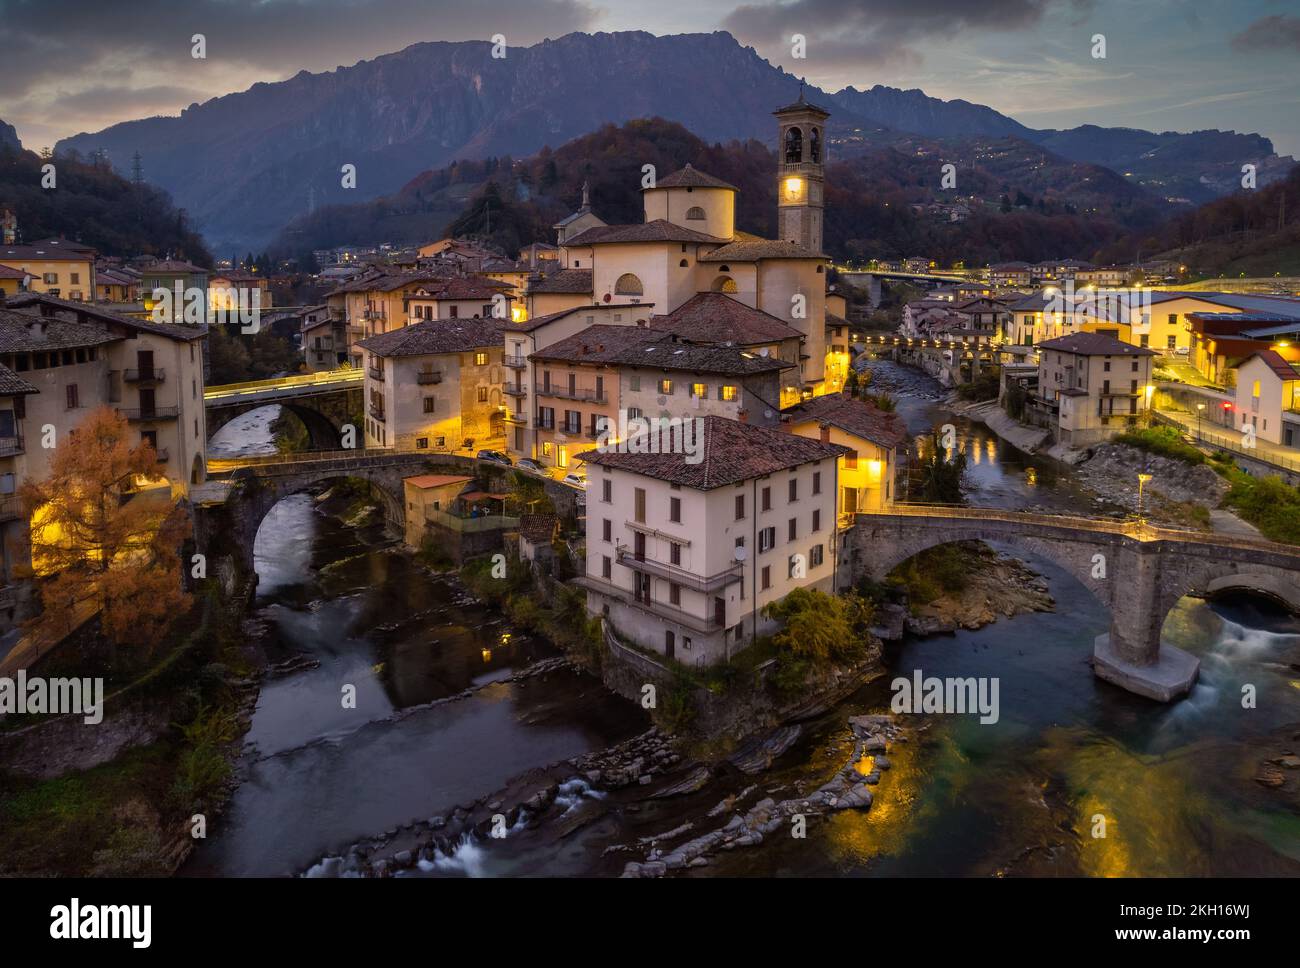 Aerial view of old church and crossing rivers surrounded by Alps mountains, San Giovanni Bianco Village, Valbrembana, Bergamo, Lombardy, Italy Stock Photo